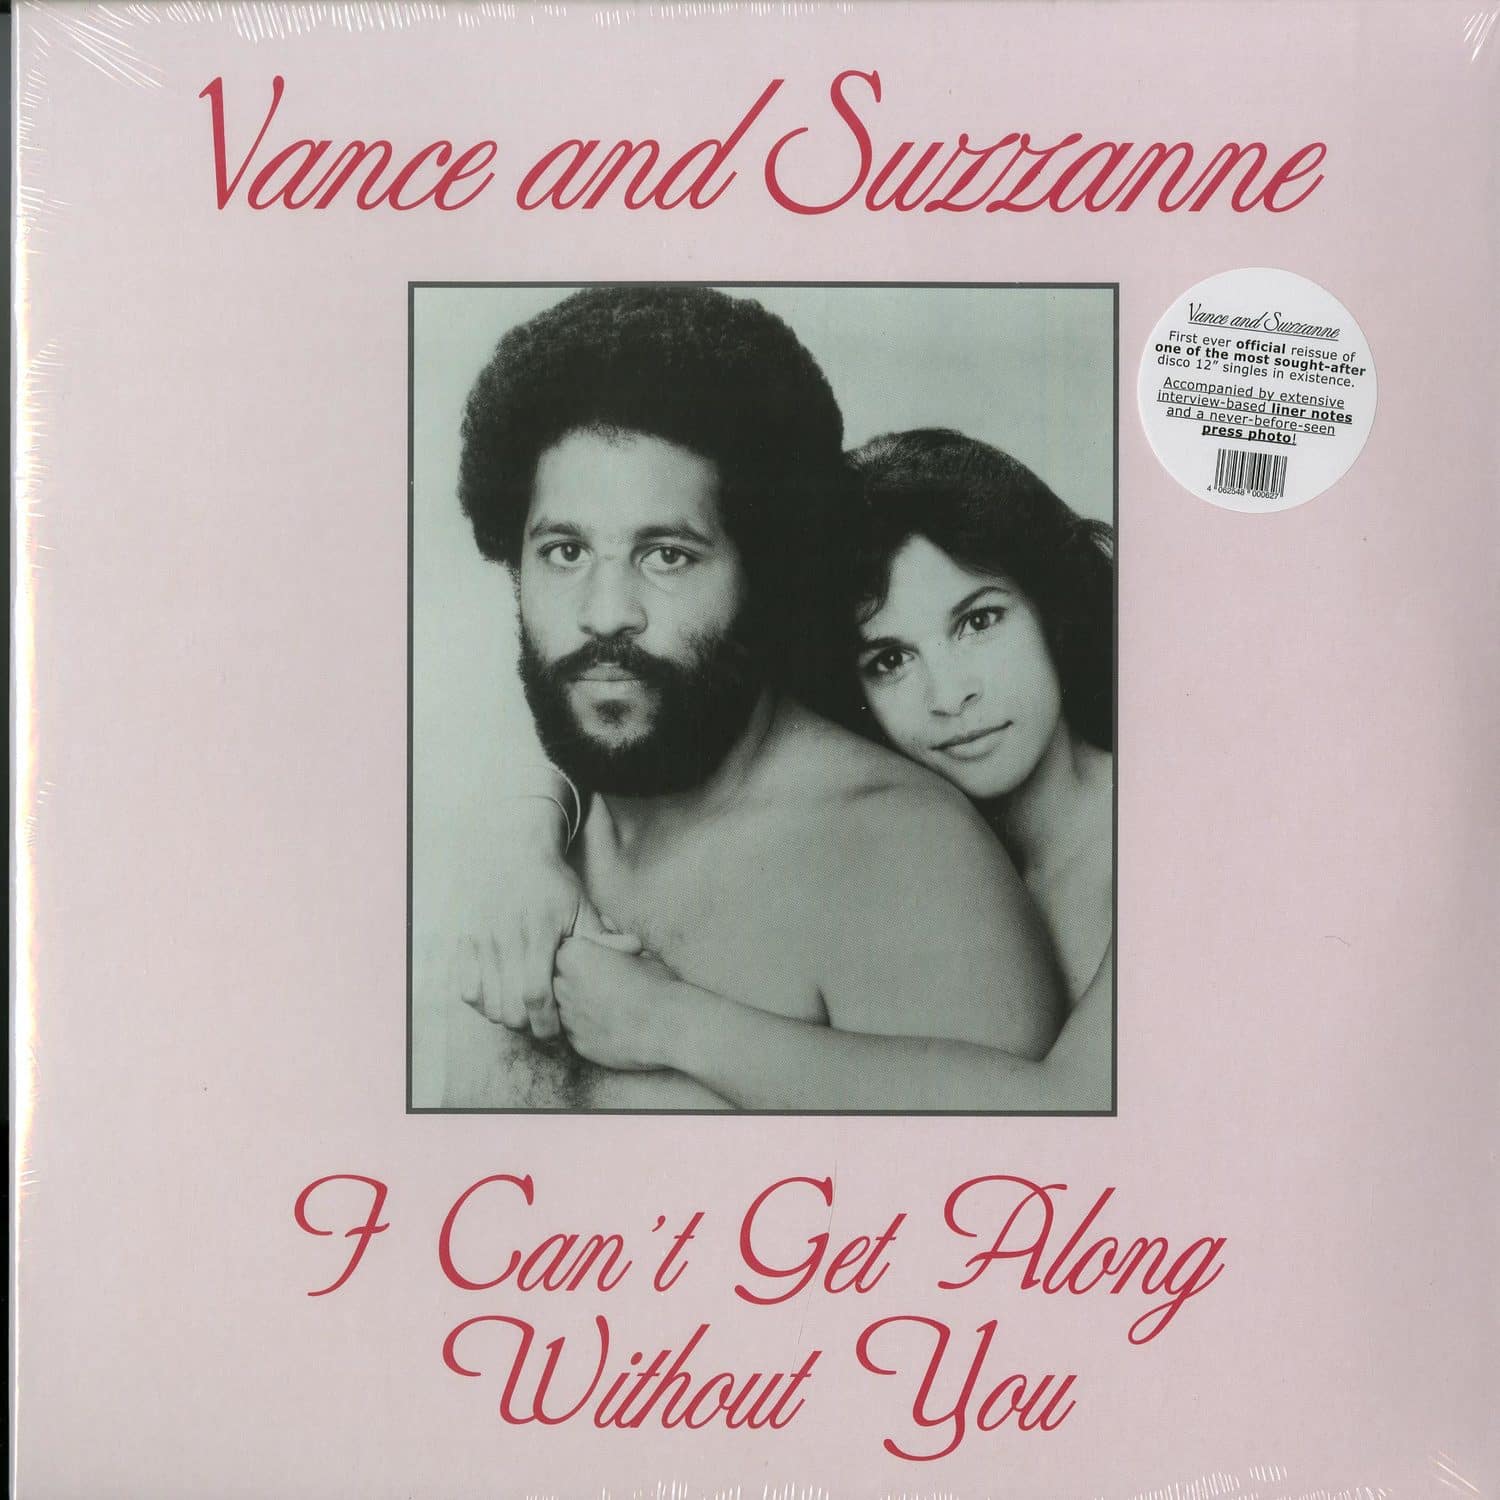 Vance & Suzzanne - I CANT GET ALONG WITHOUT YOU